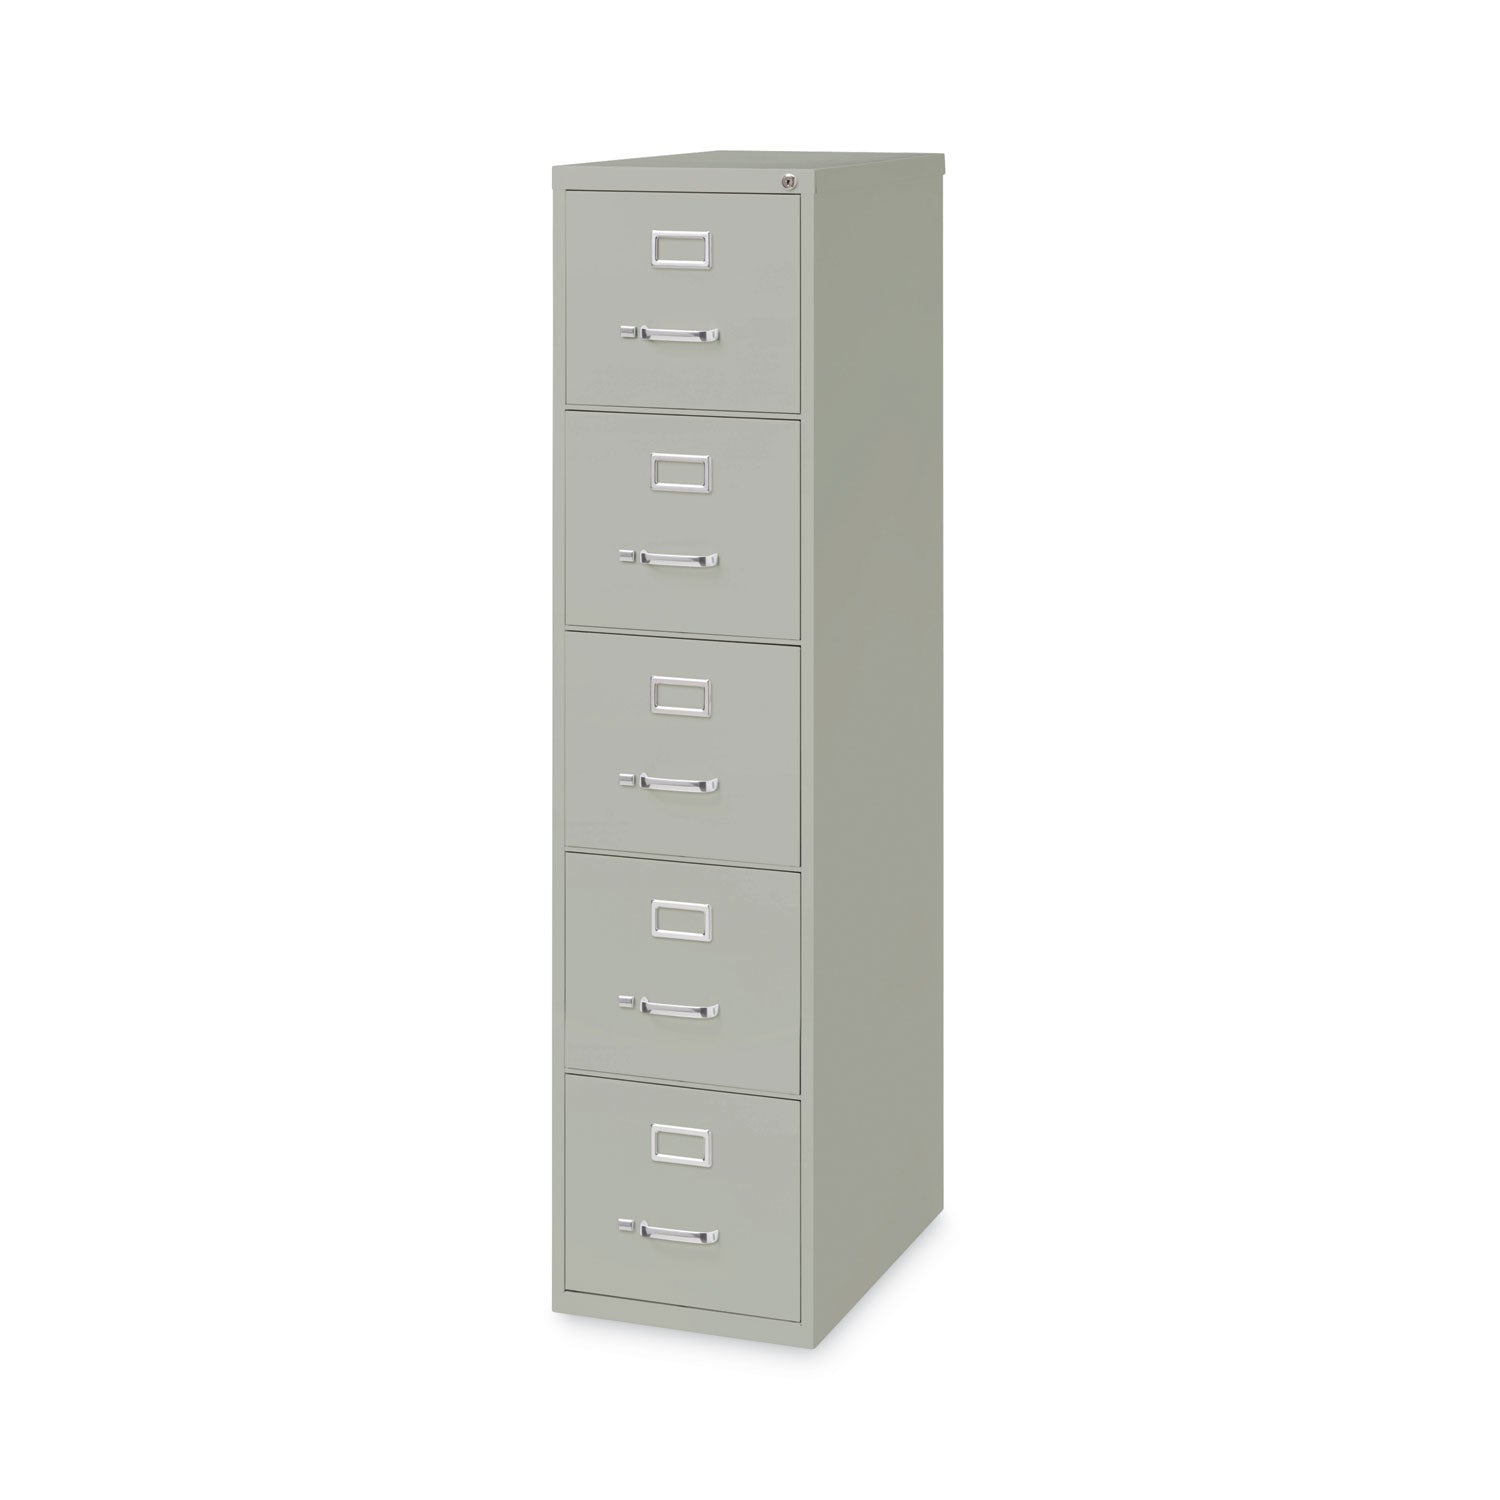 vertical-letter-file-cabinet-5-letter-size-file-drawers-light-gray-15-x-265-x-6137_hid17779 - 1